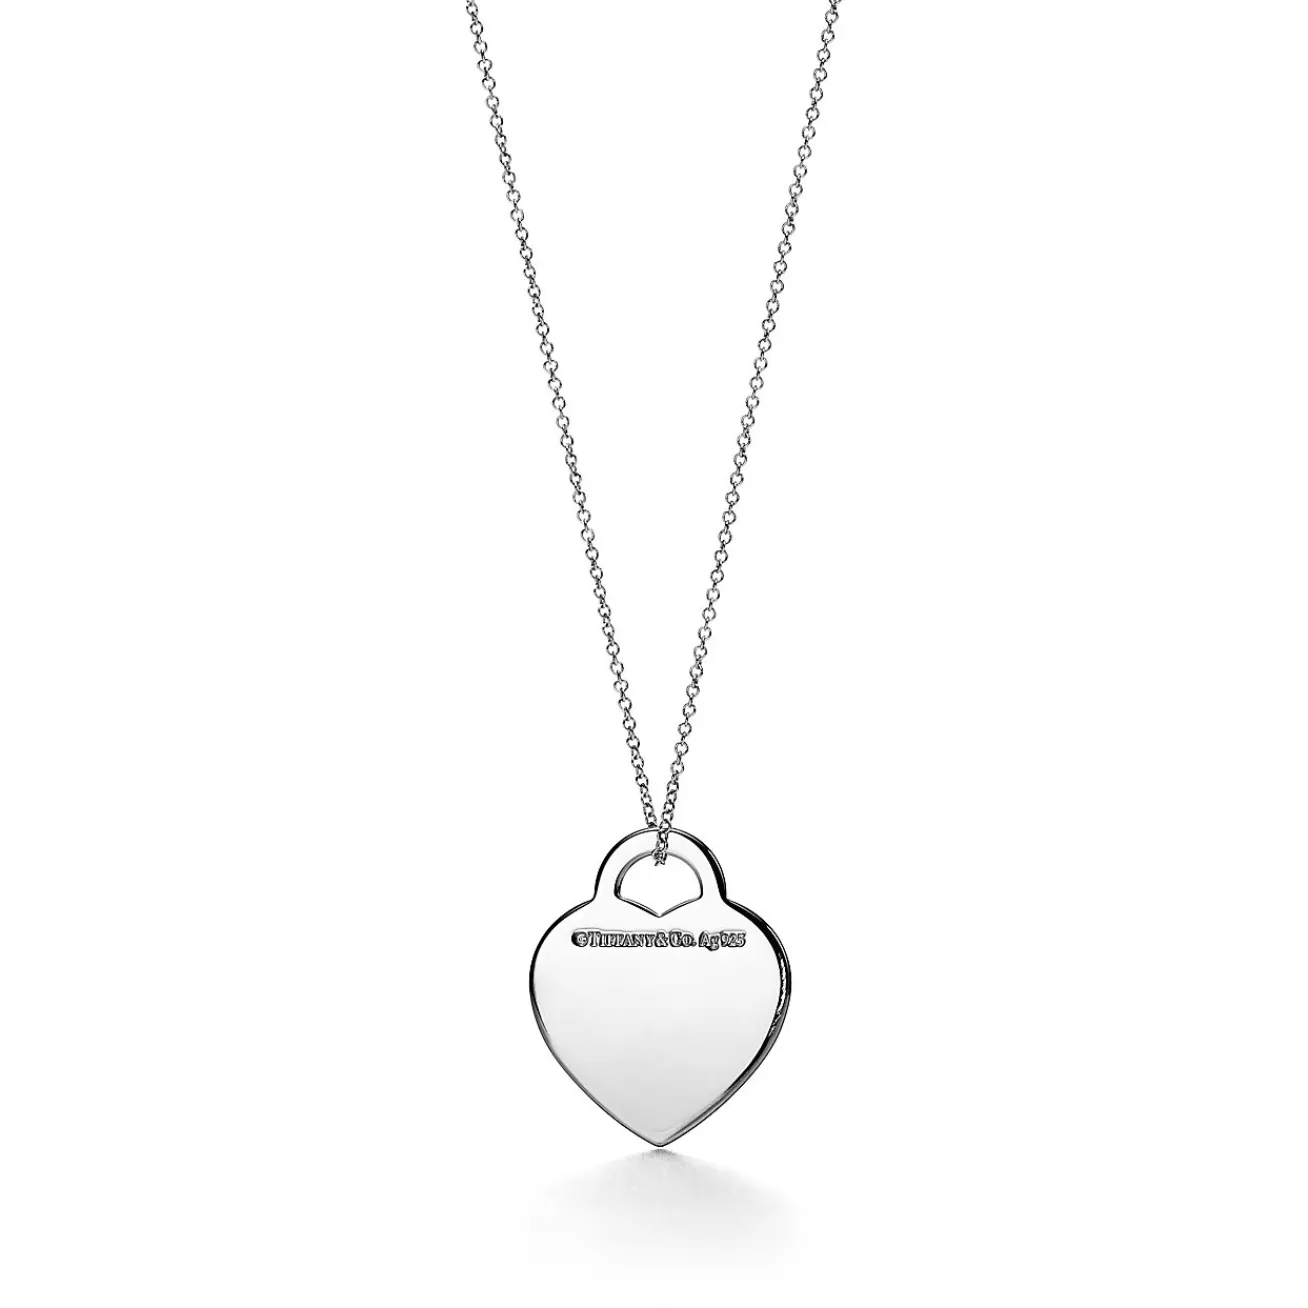 Tiffany & Co. Return to Tiffany® Heart Tag Pendant in Sterling Silver with a Diamond, Medium | ^ Necklaces & Pendants | Sterling Silver Jewelry